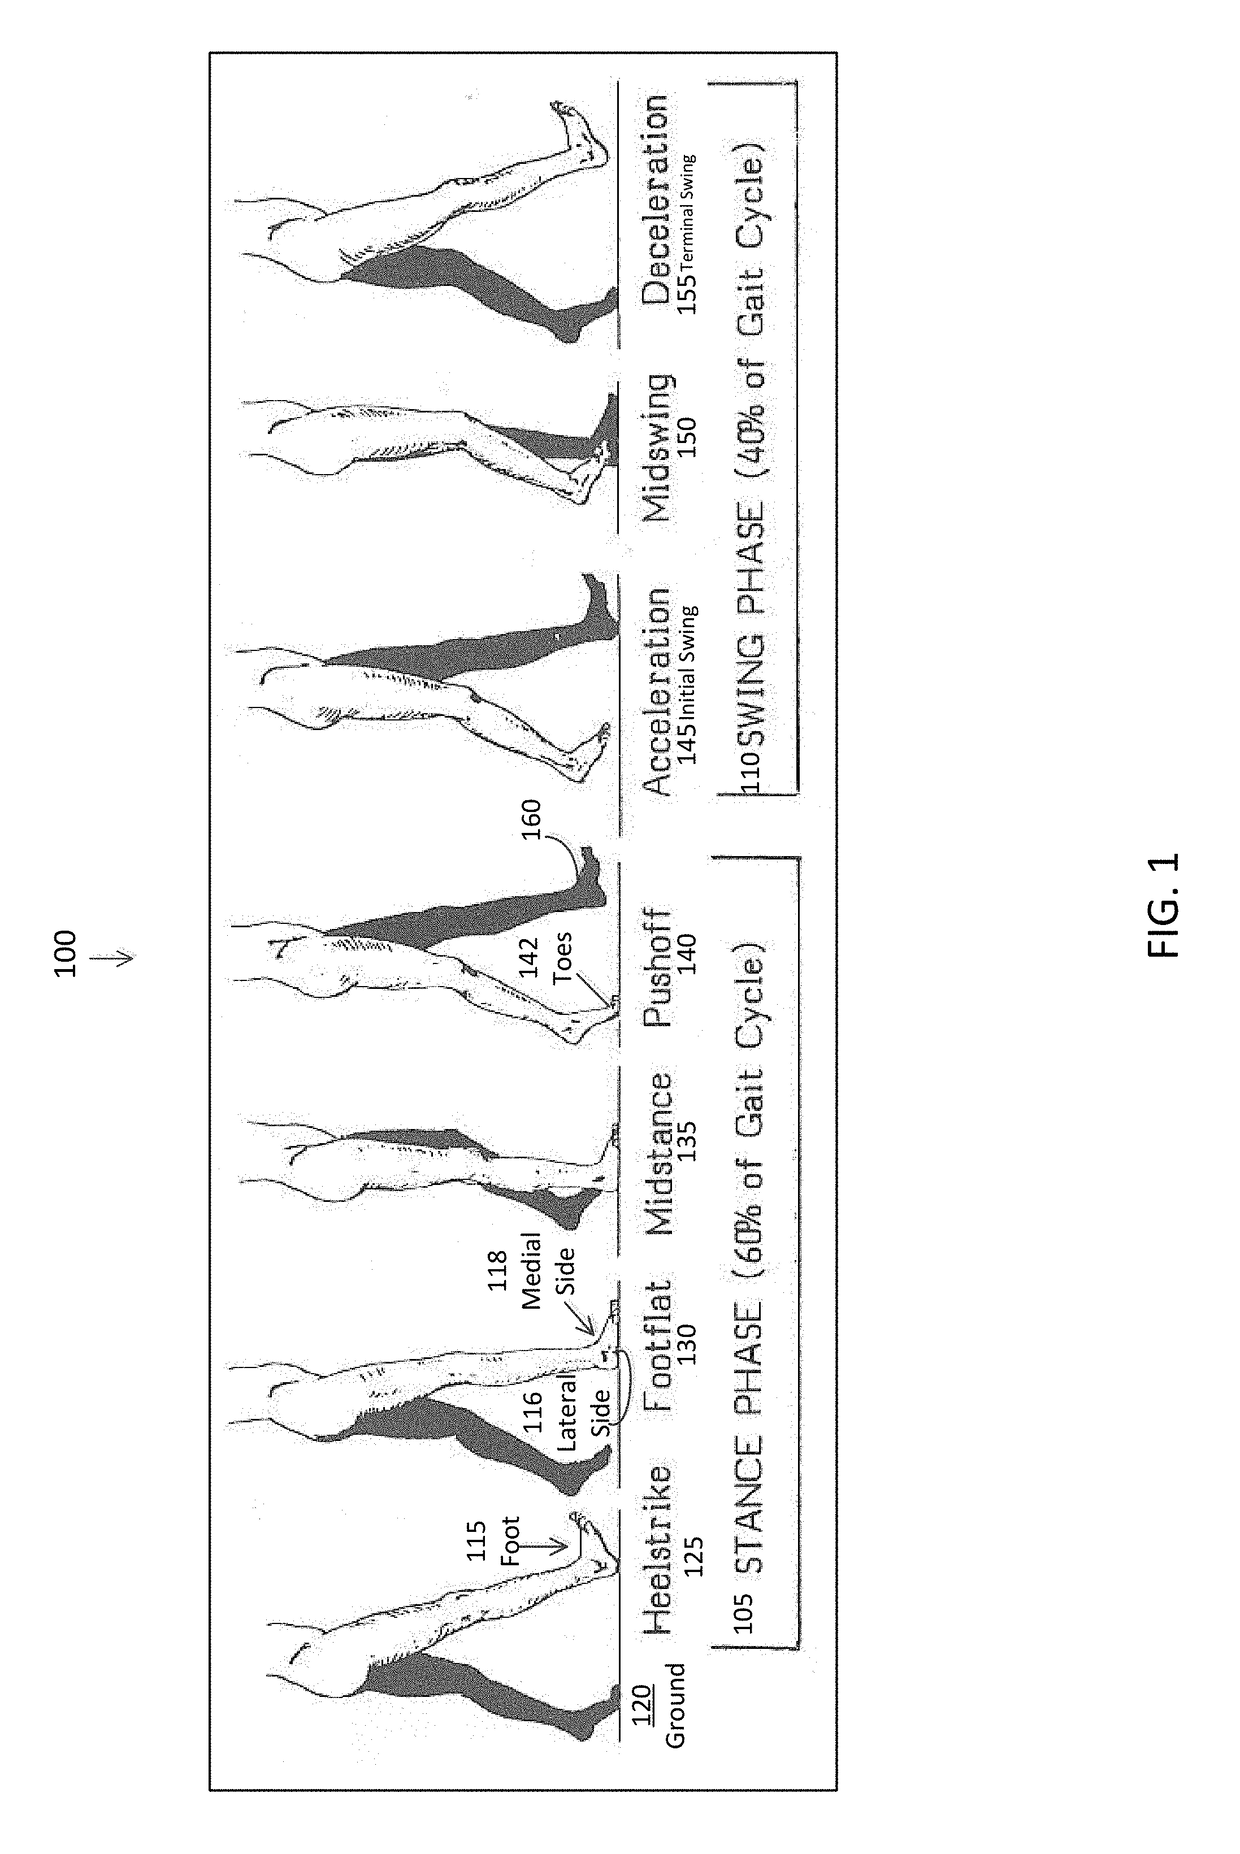 Method and Apparatus to Assist Foot Motion About the Pronation Axis